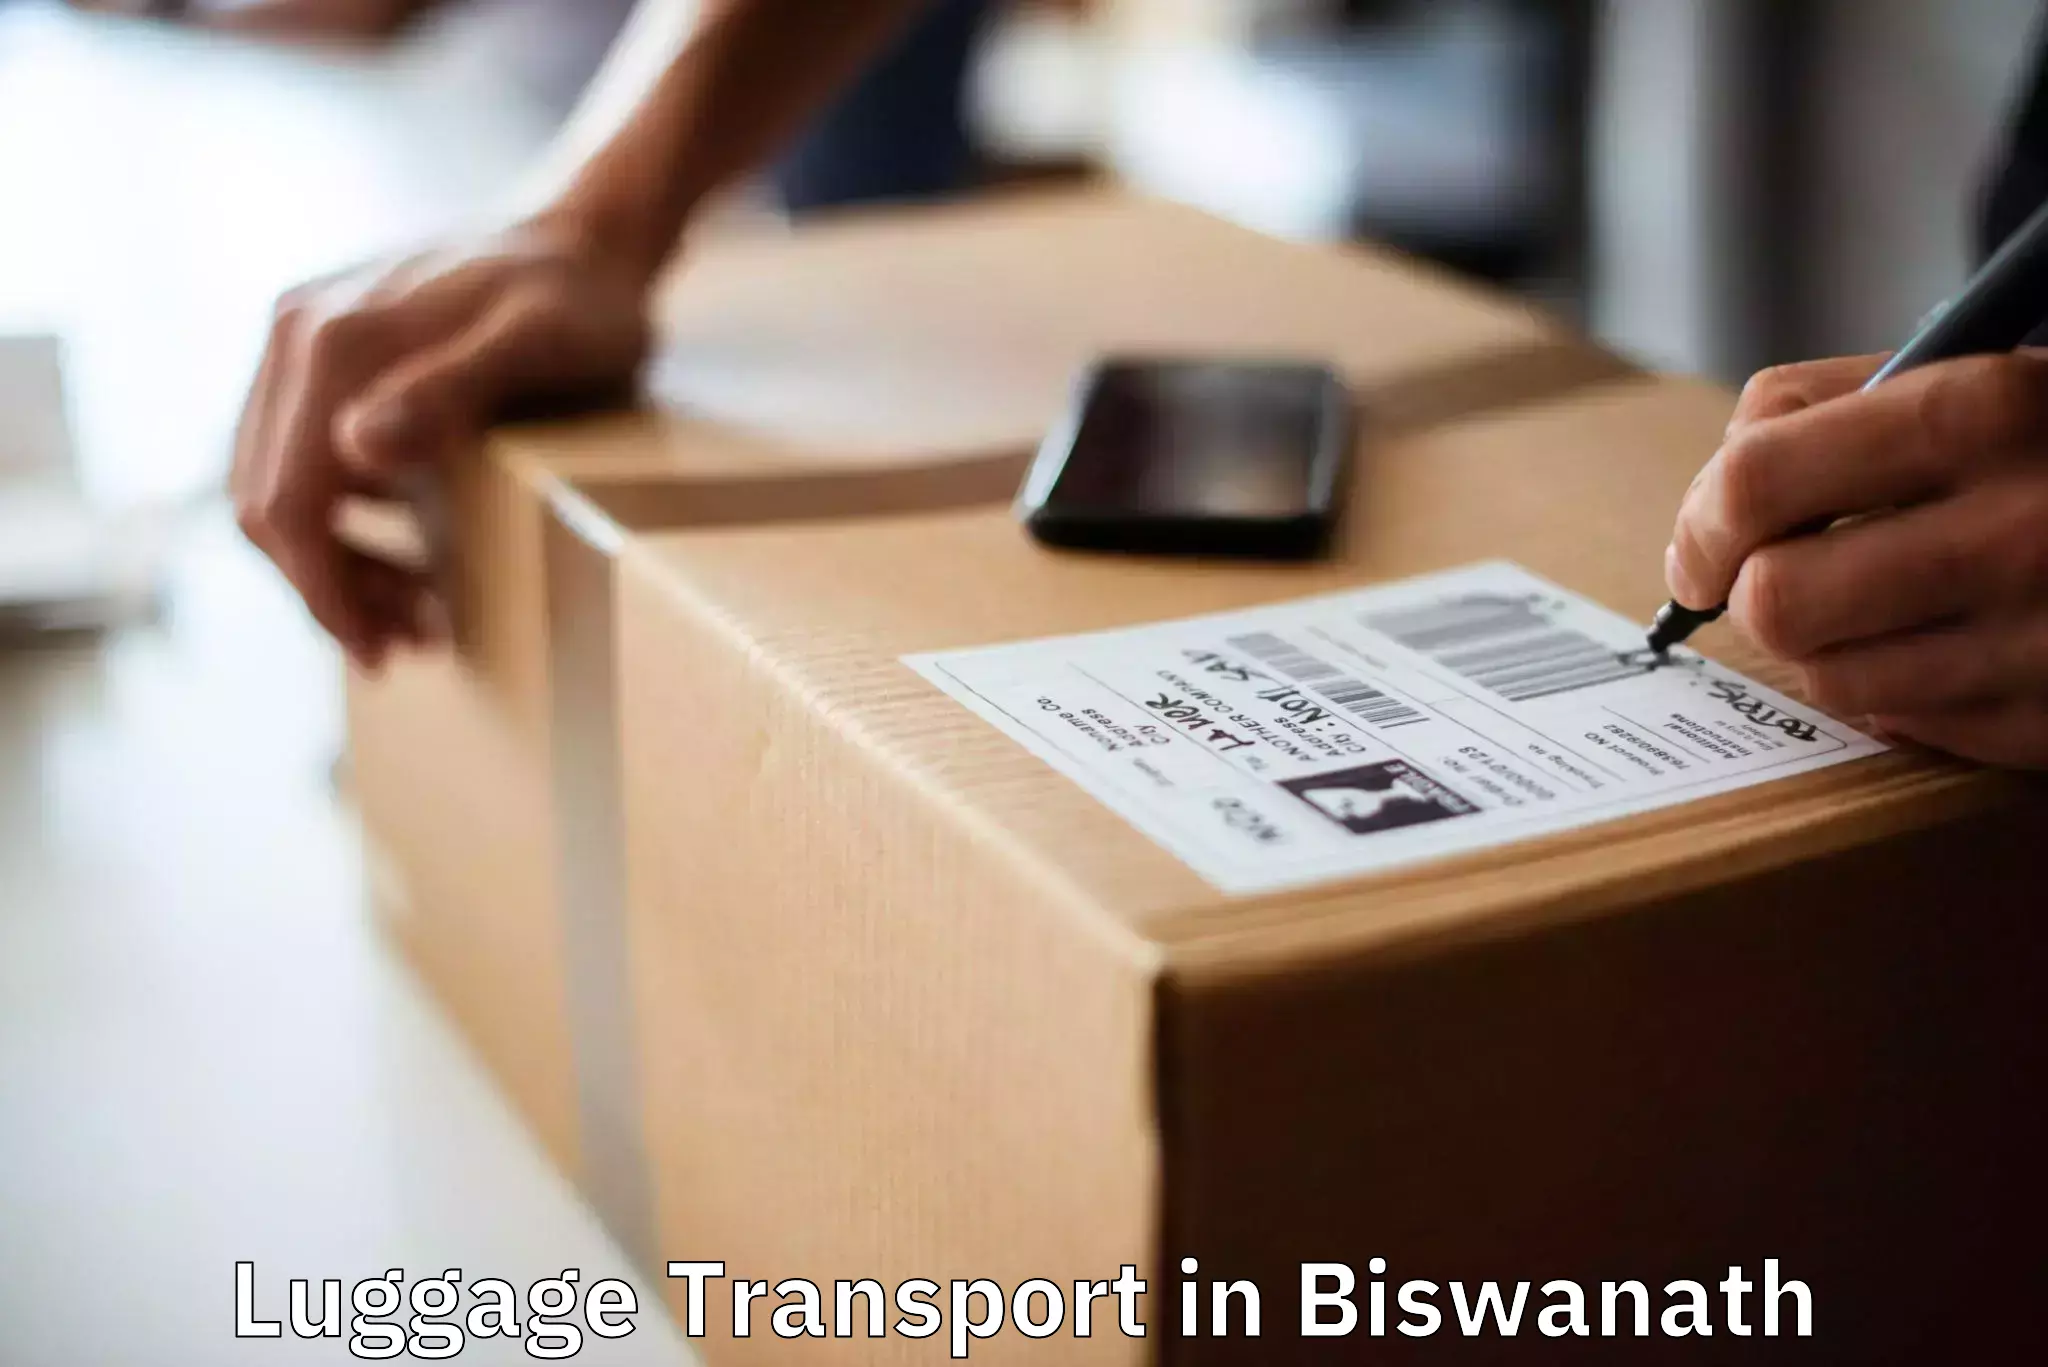 Luggage transport company in Biswanath